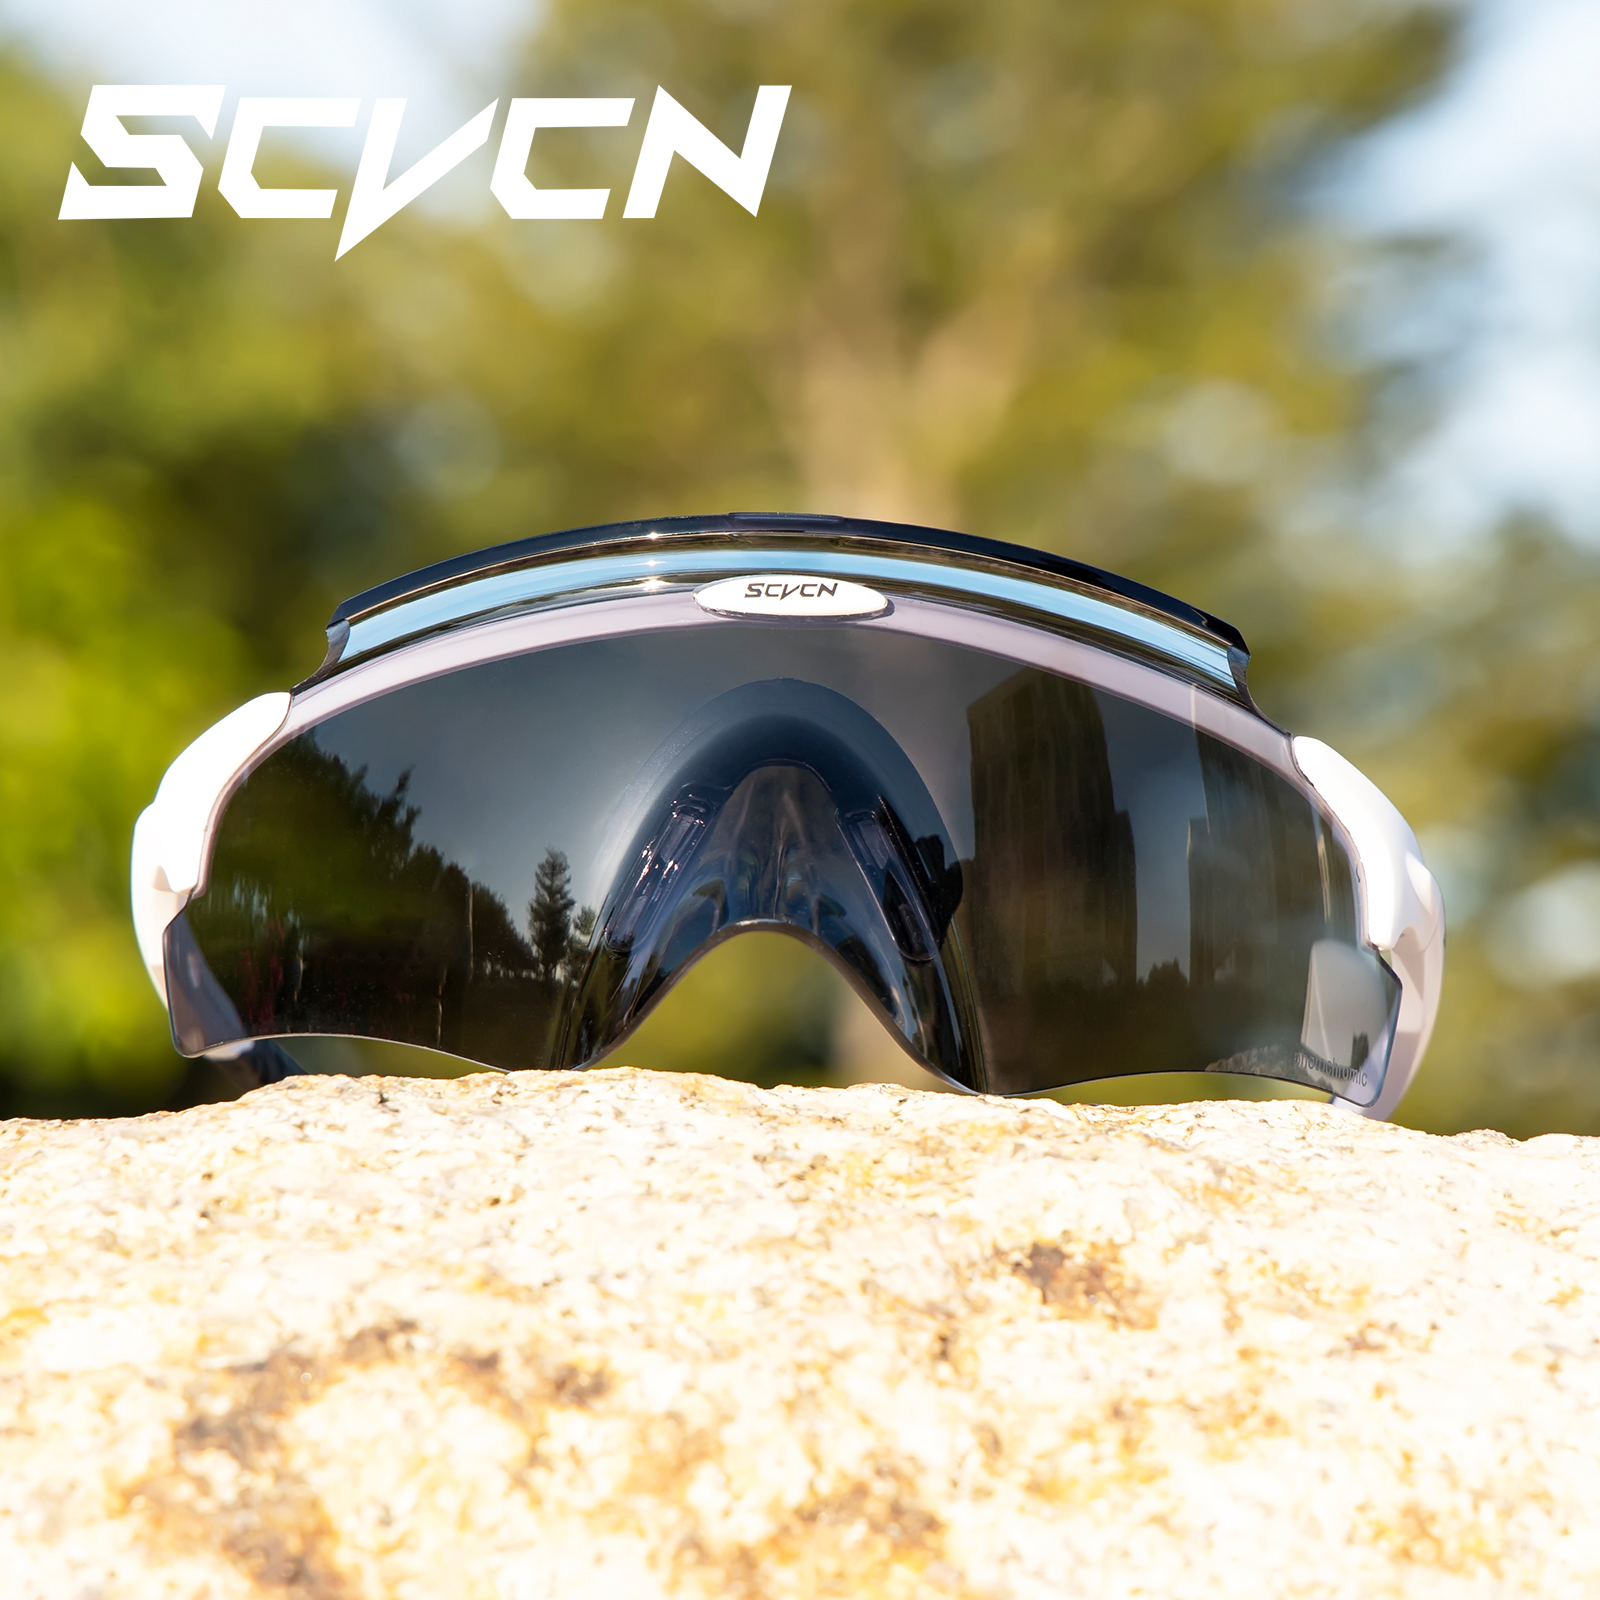 SCVCN New Model Polarized Colorful Sport Sunglasses, Men & Women, Suitable for Outdoor Activities Like Fishing, Cycling, Racing, Hiking and Camping